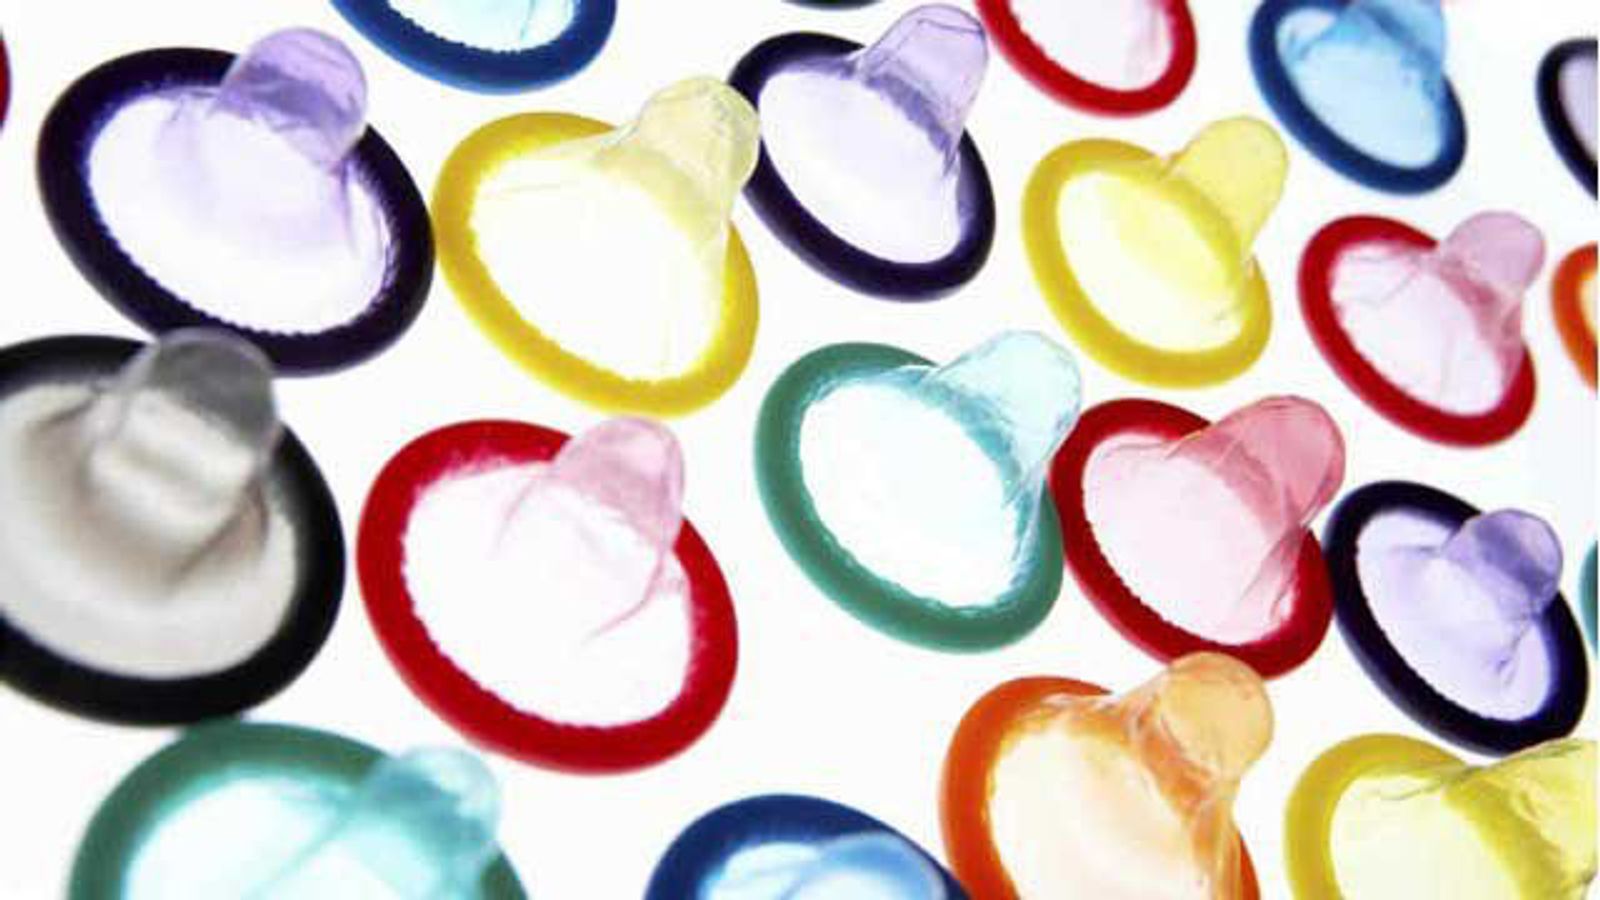 Worldwide Condom Shortage Possible in Coming Months